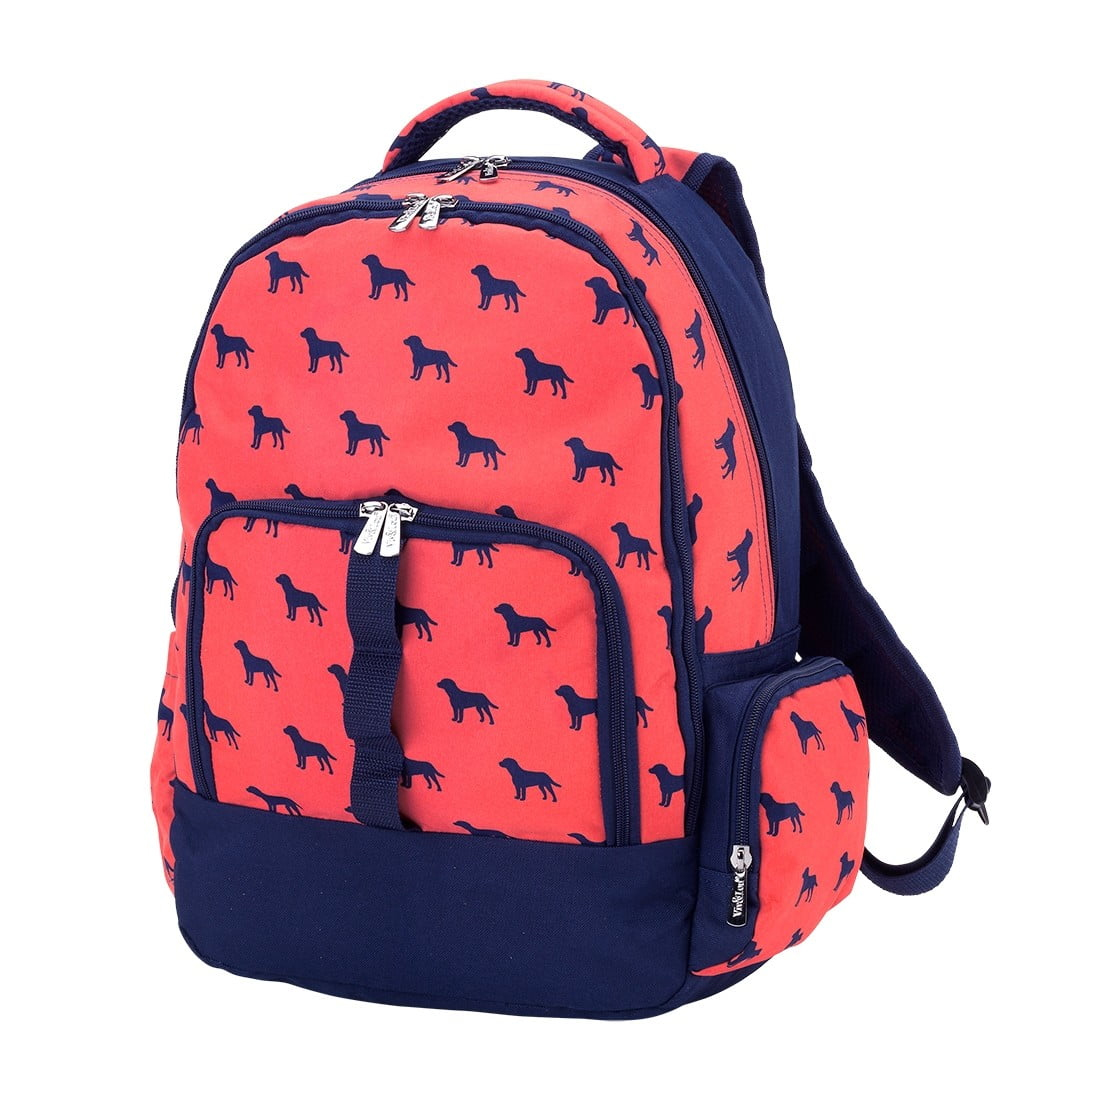 Backpack Embroidery Blanks - DOG DAYS - CLOSEOUT